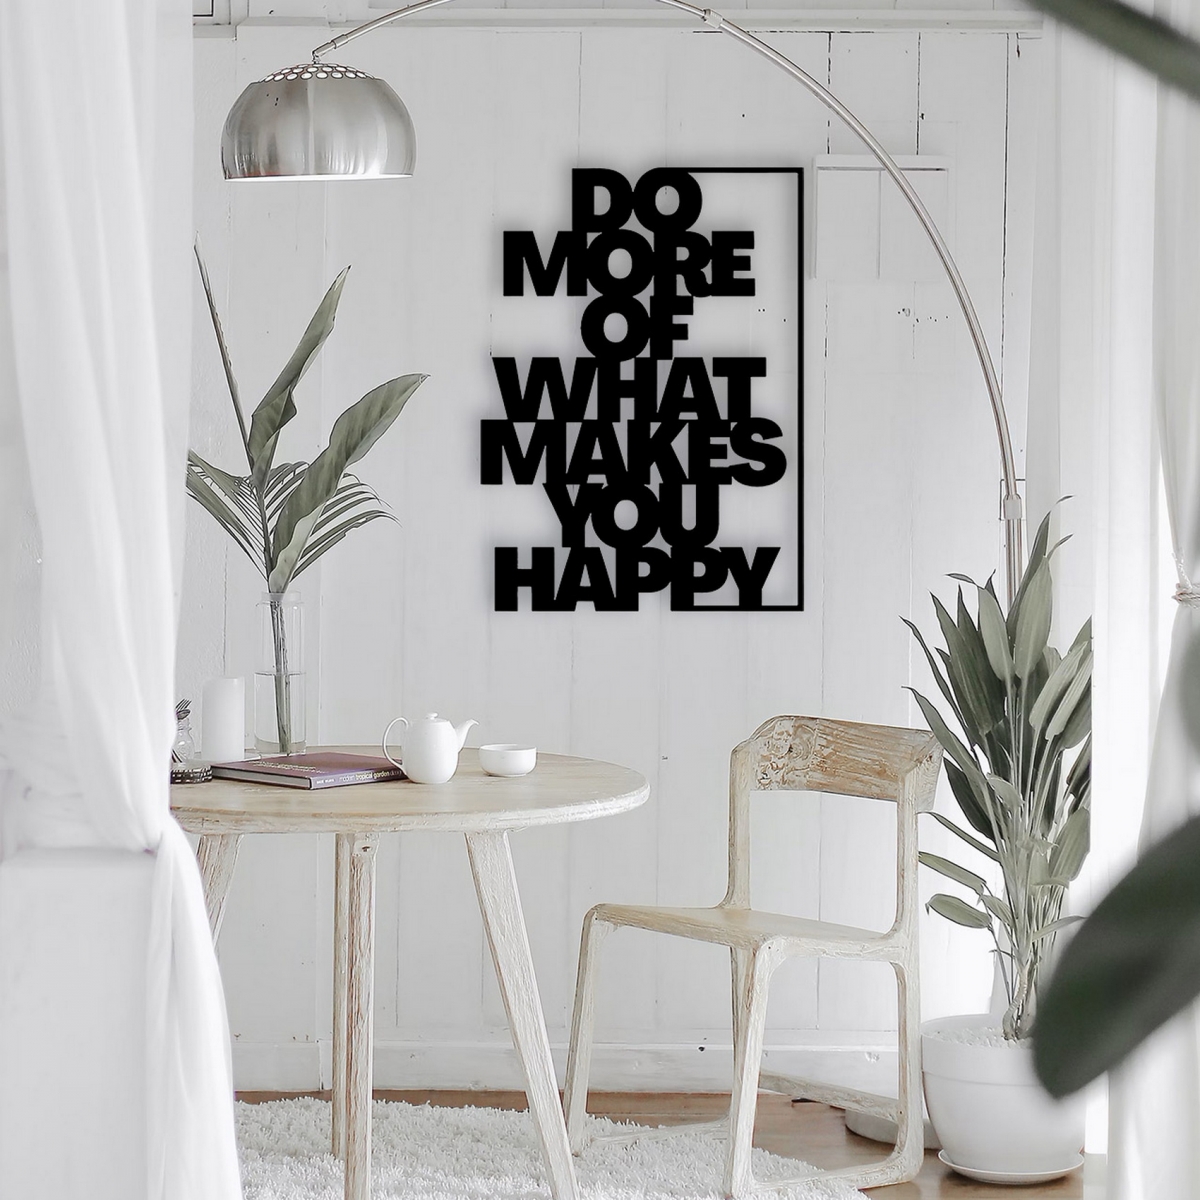 Do More of What Makes you Happy